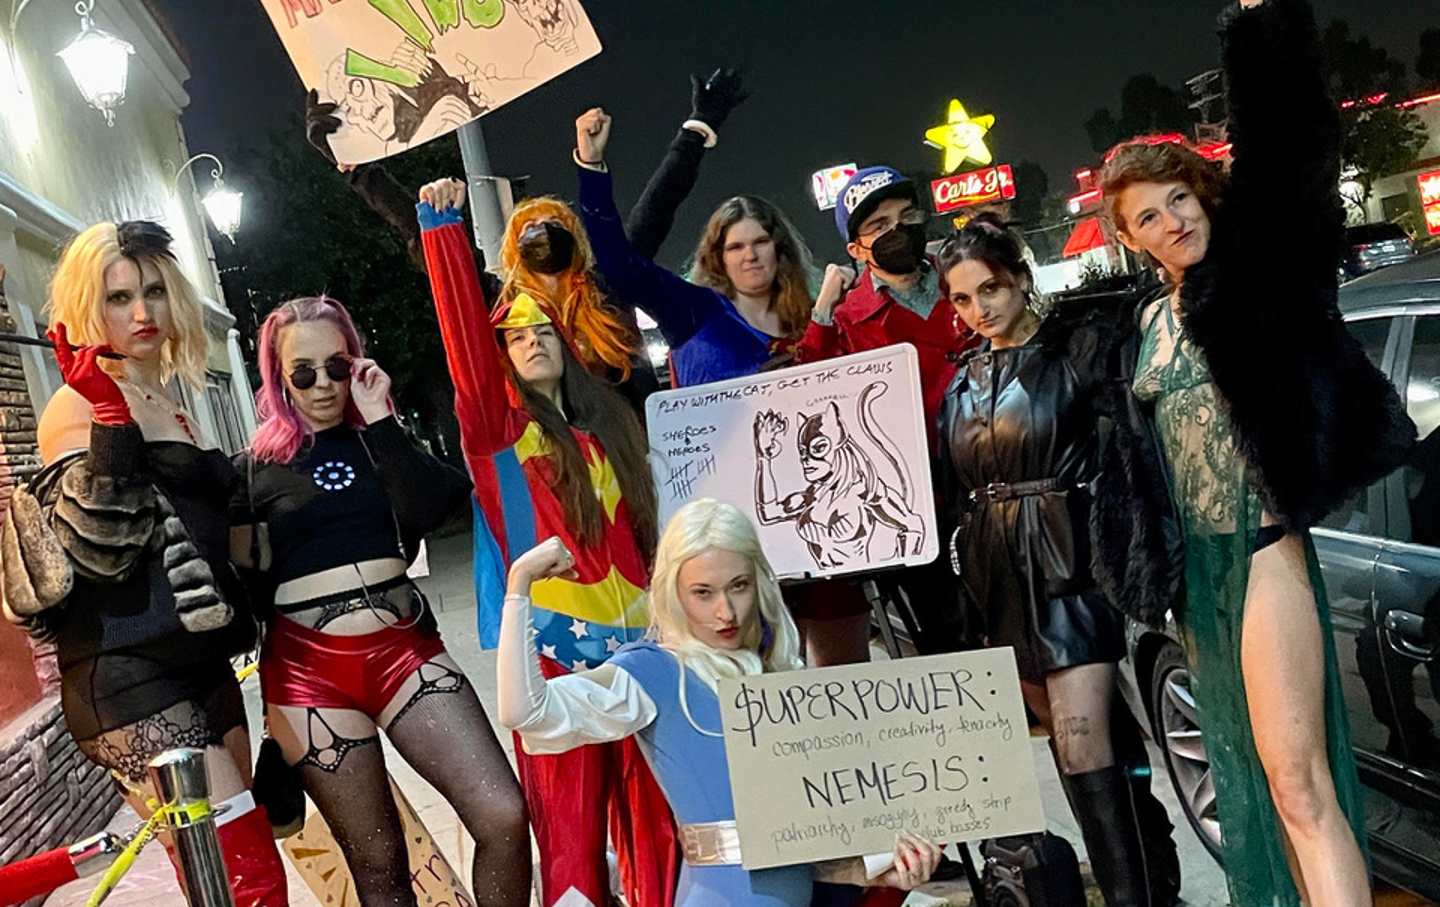 A group of women in costume hold signs. One raises her fist.